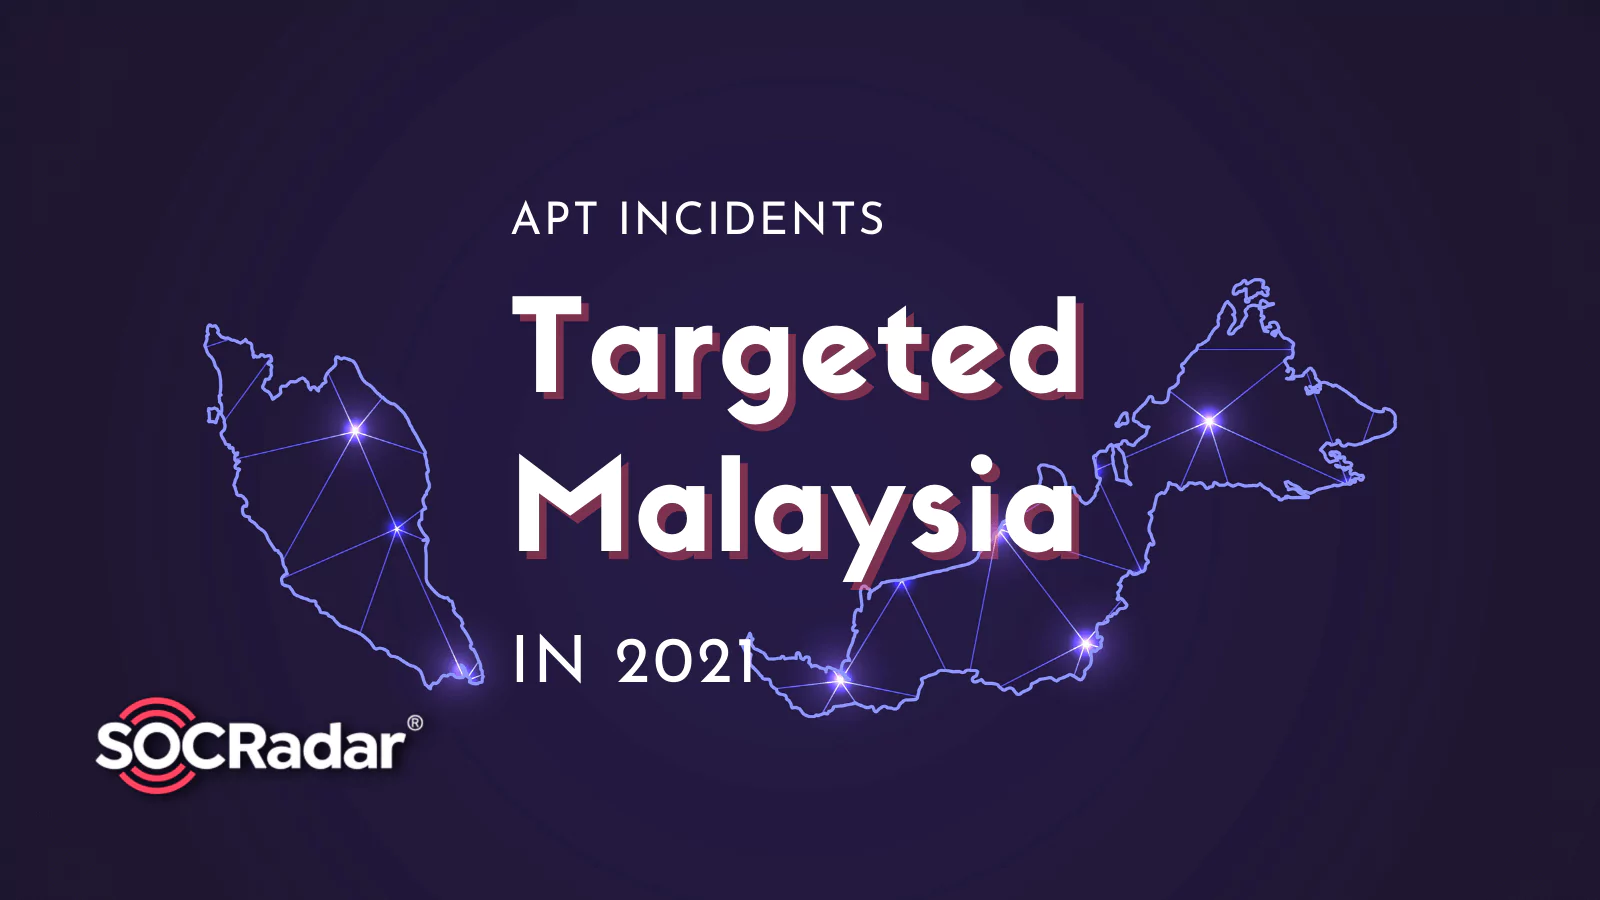 SOCRadar® Cyber Intelligence Inc. | Most Remarkable APT Incidents That Targeted Malaysia in 2021